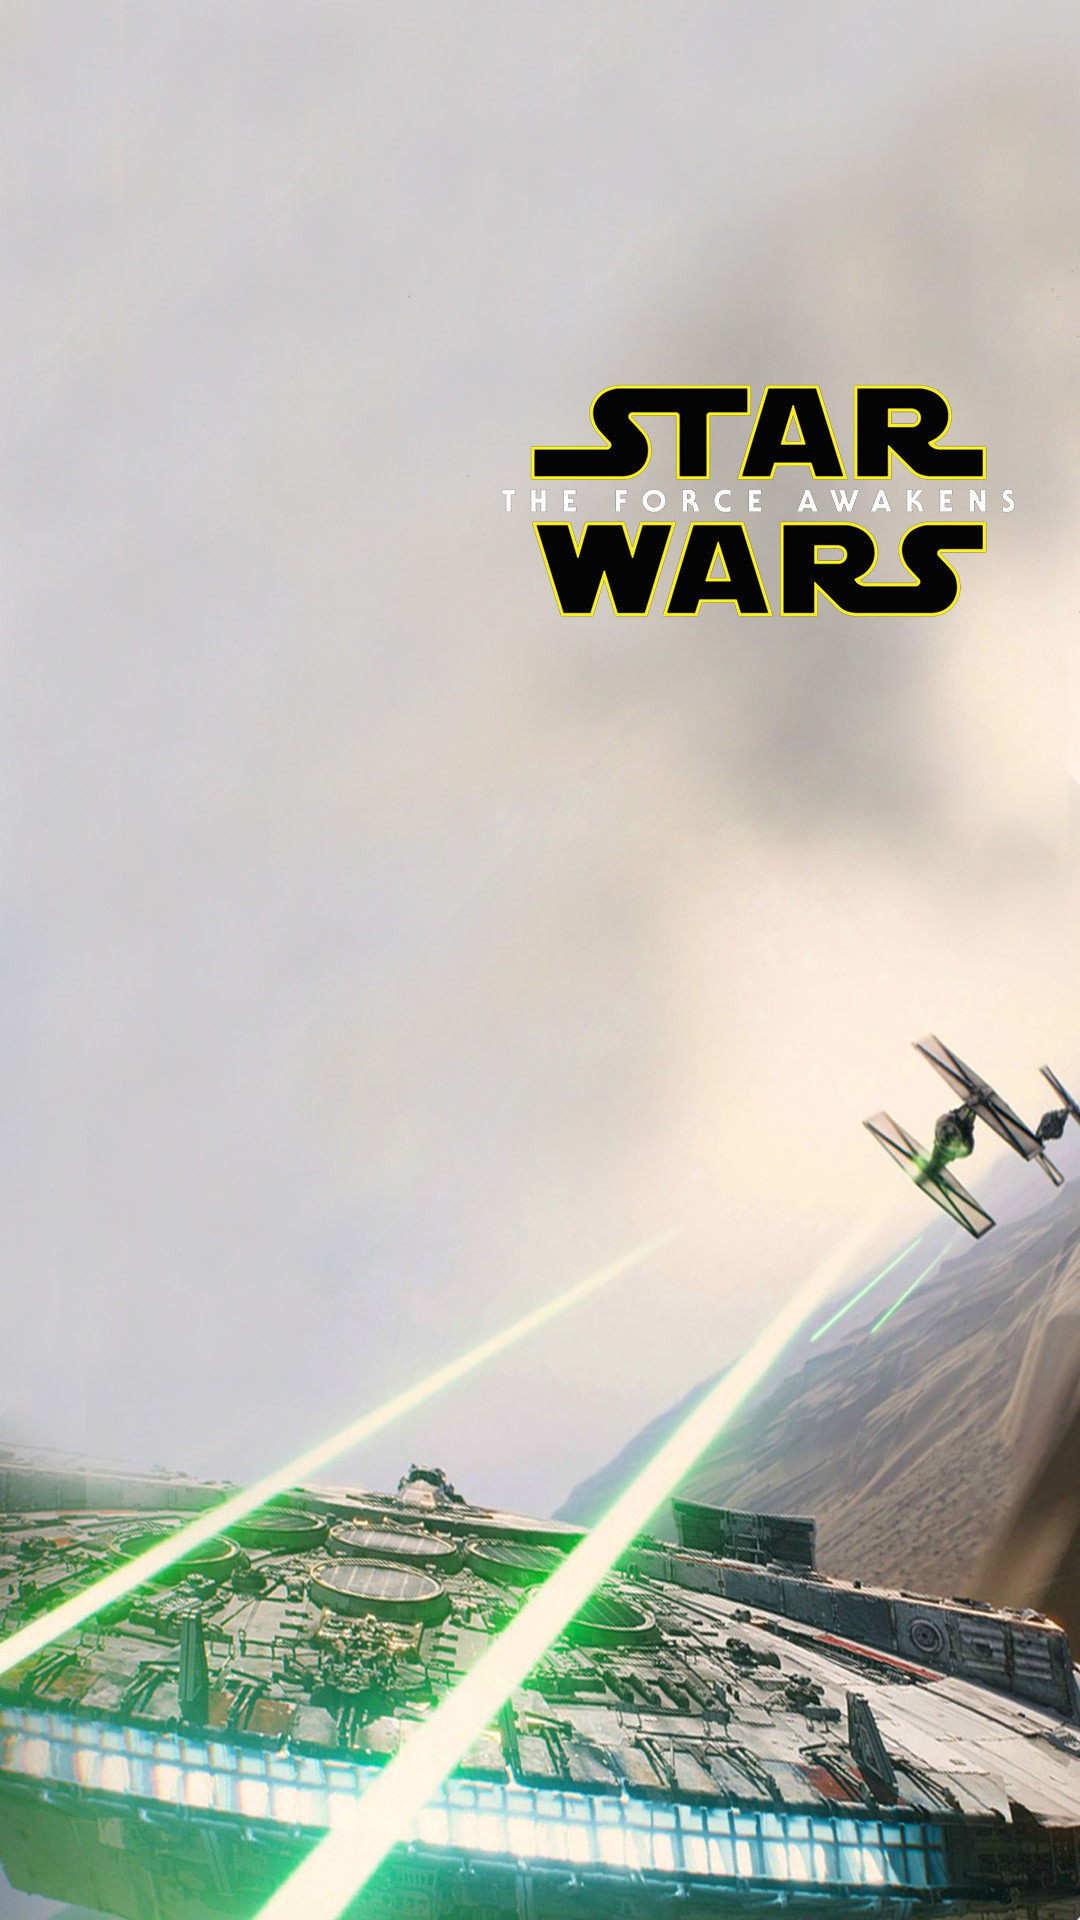 Star Wars The Force Awakens Wallpaper Millennium Falcon Tie Attack. Download iPhone with logo